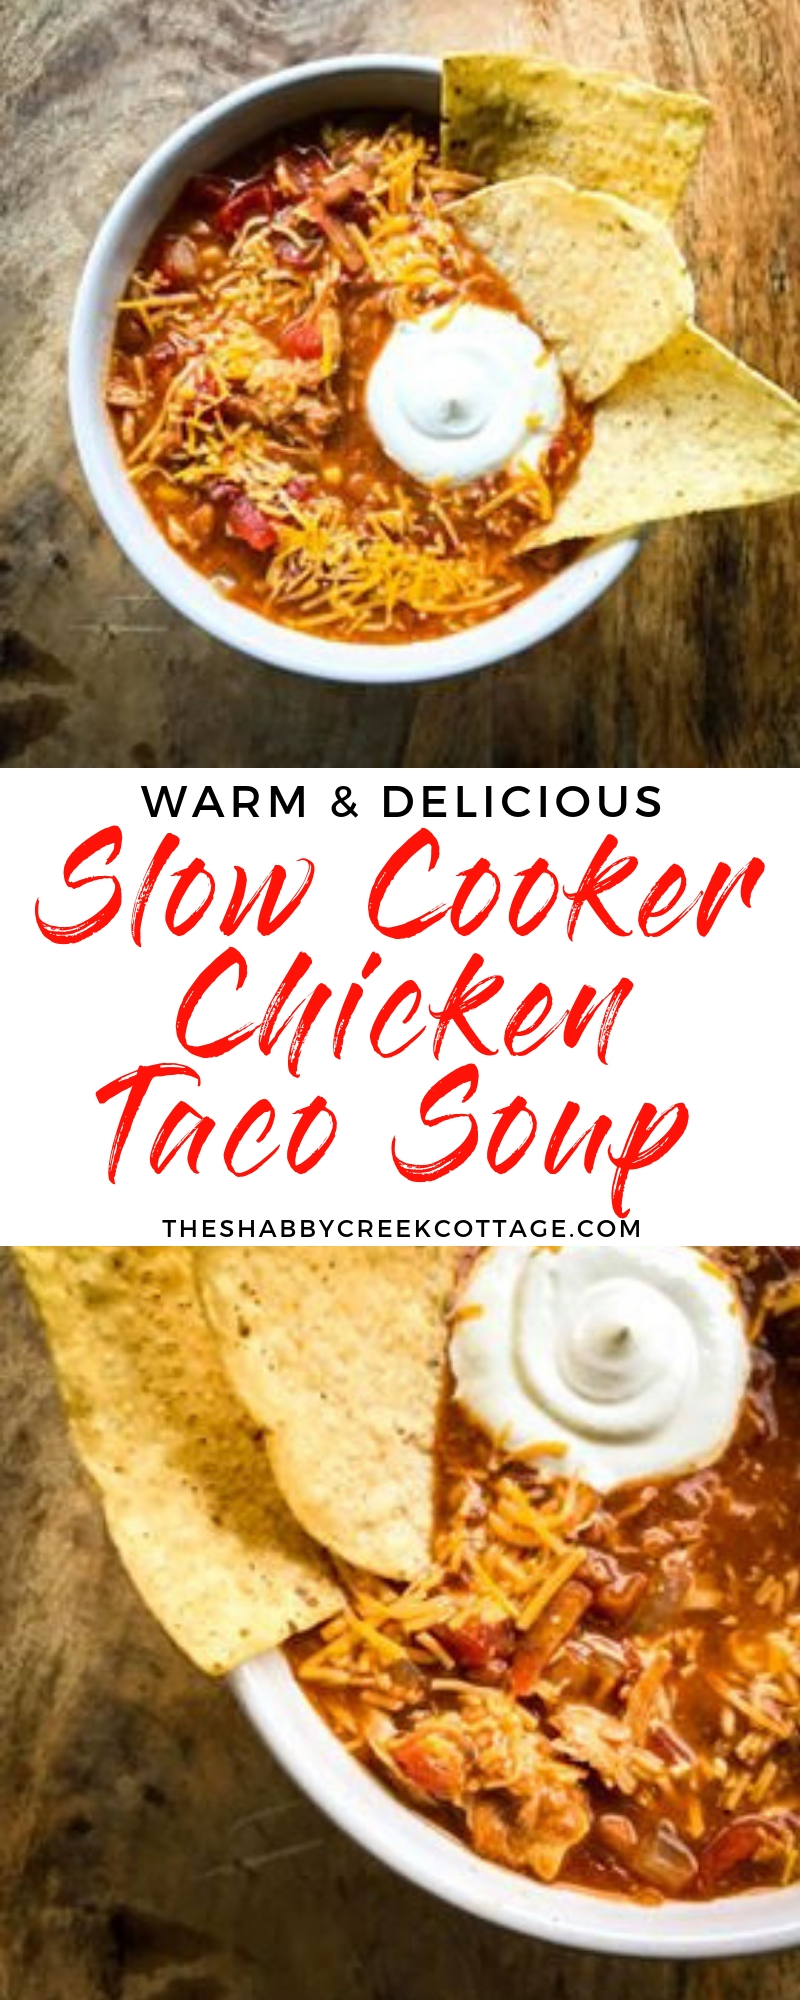 slow cooker chicken taco soup - The Shabby Creek Cottage